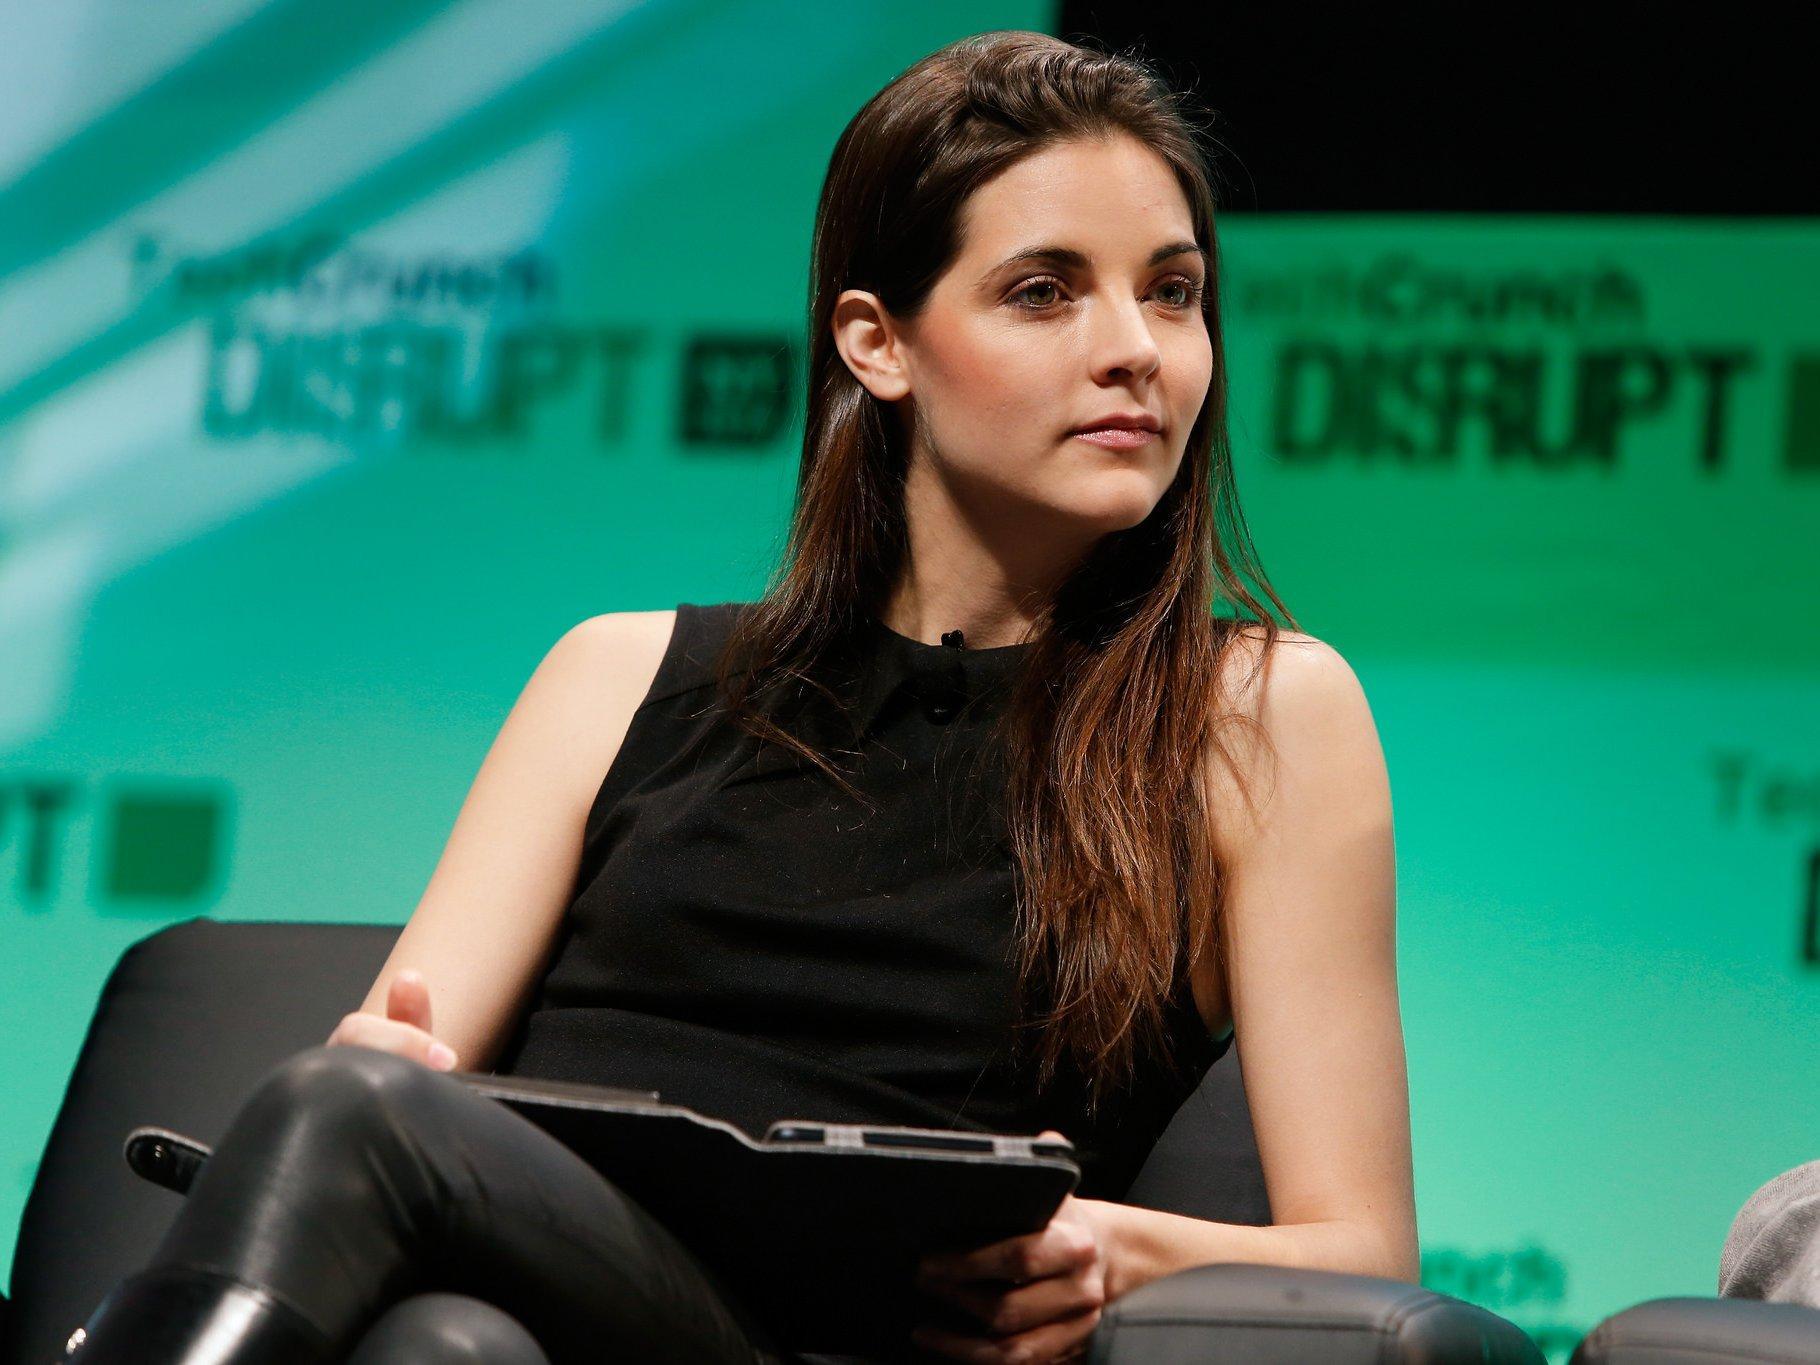 She refused to give up. Kathryn Minshew pictured.